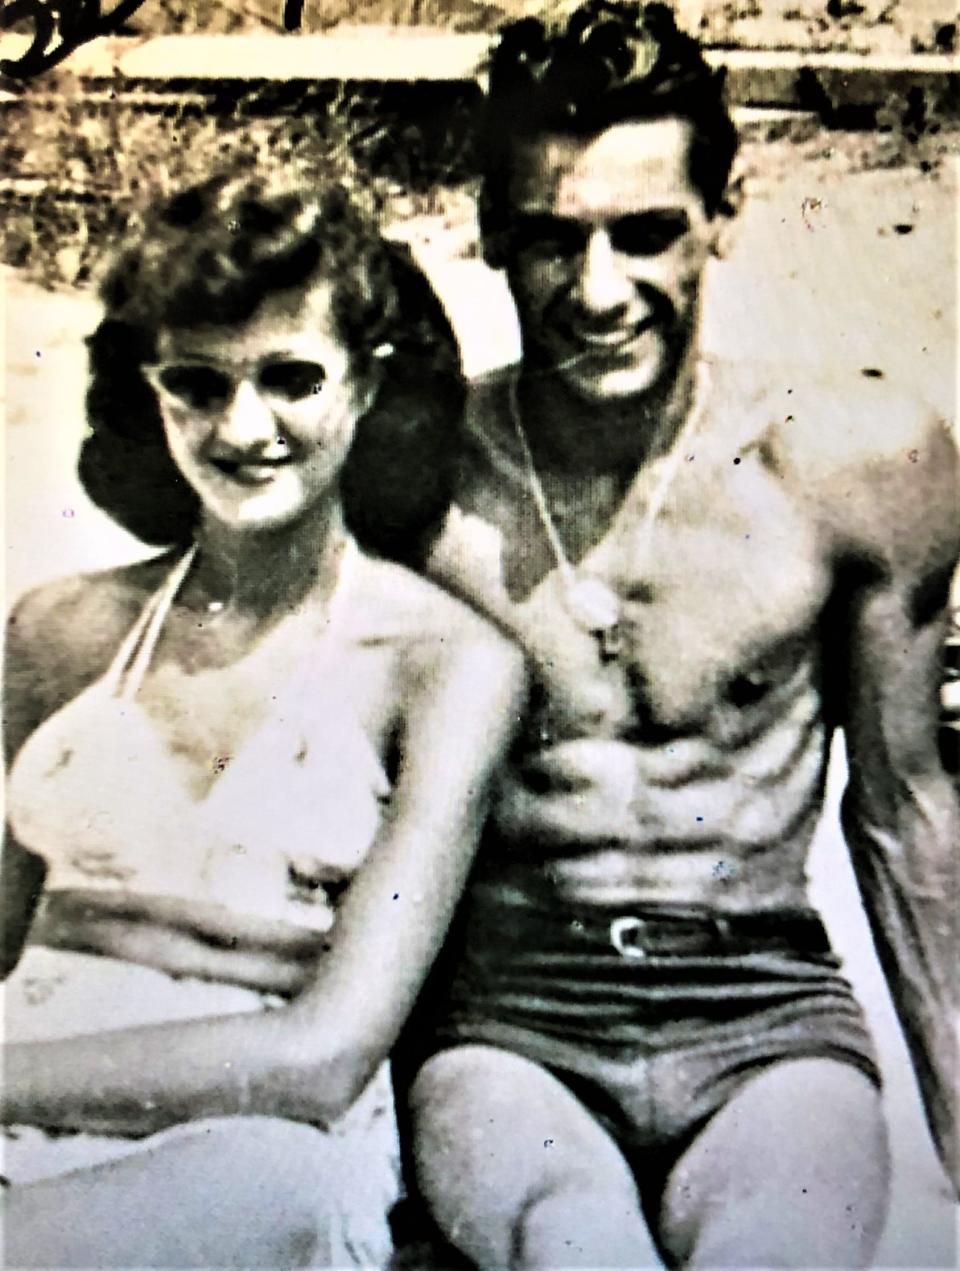 Betty Mirisola and Charlie Santoro met in 1947 and were married in 1948.